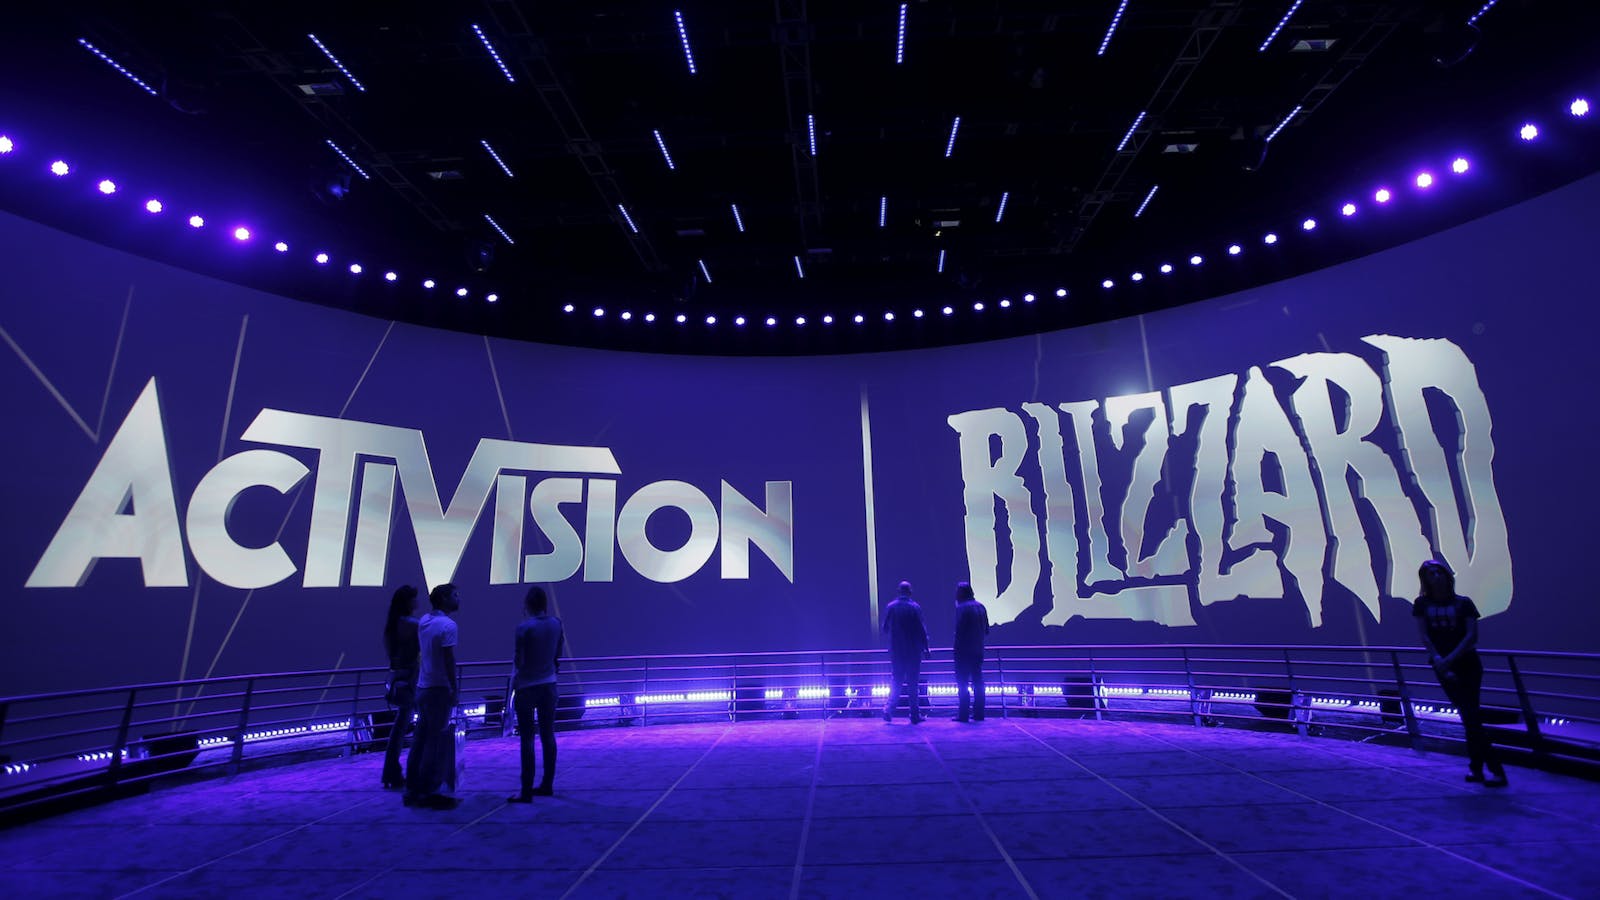 Activision Blizzard's booth at a 2013 gaming trade show. Photo: AP.